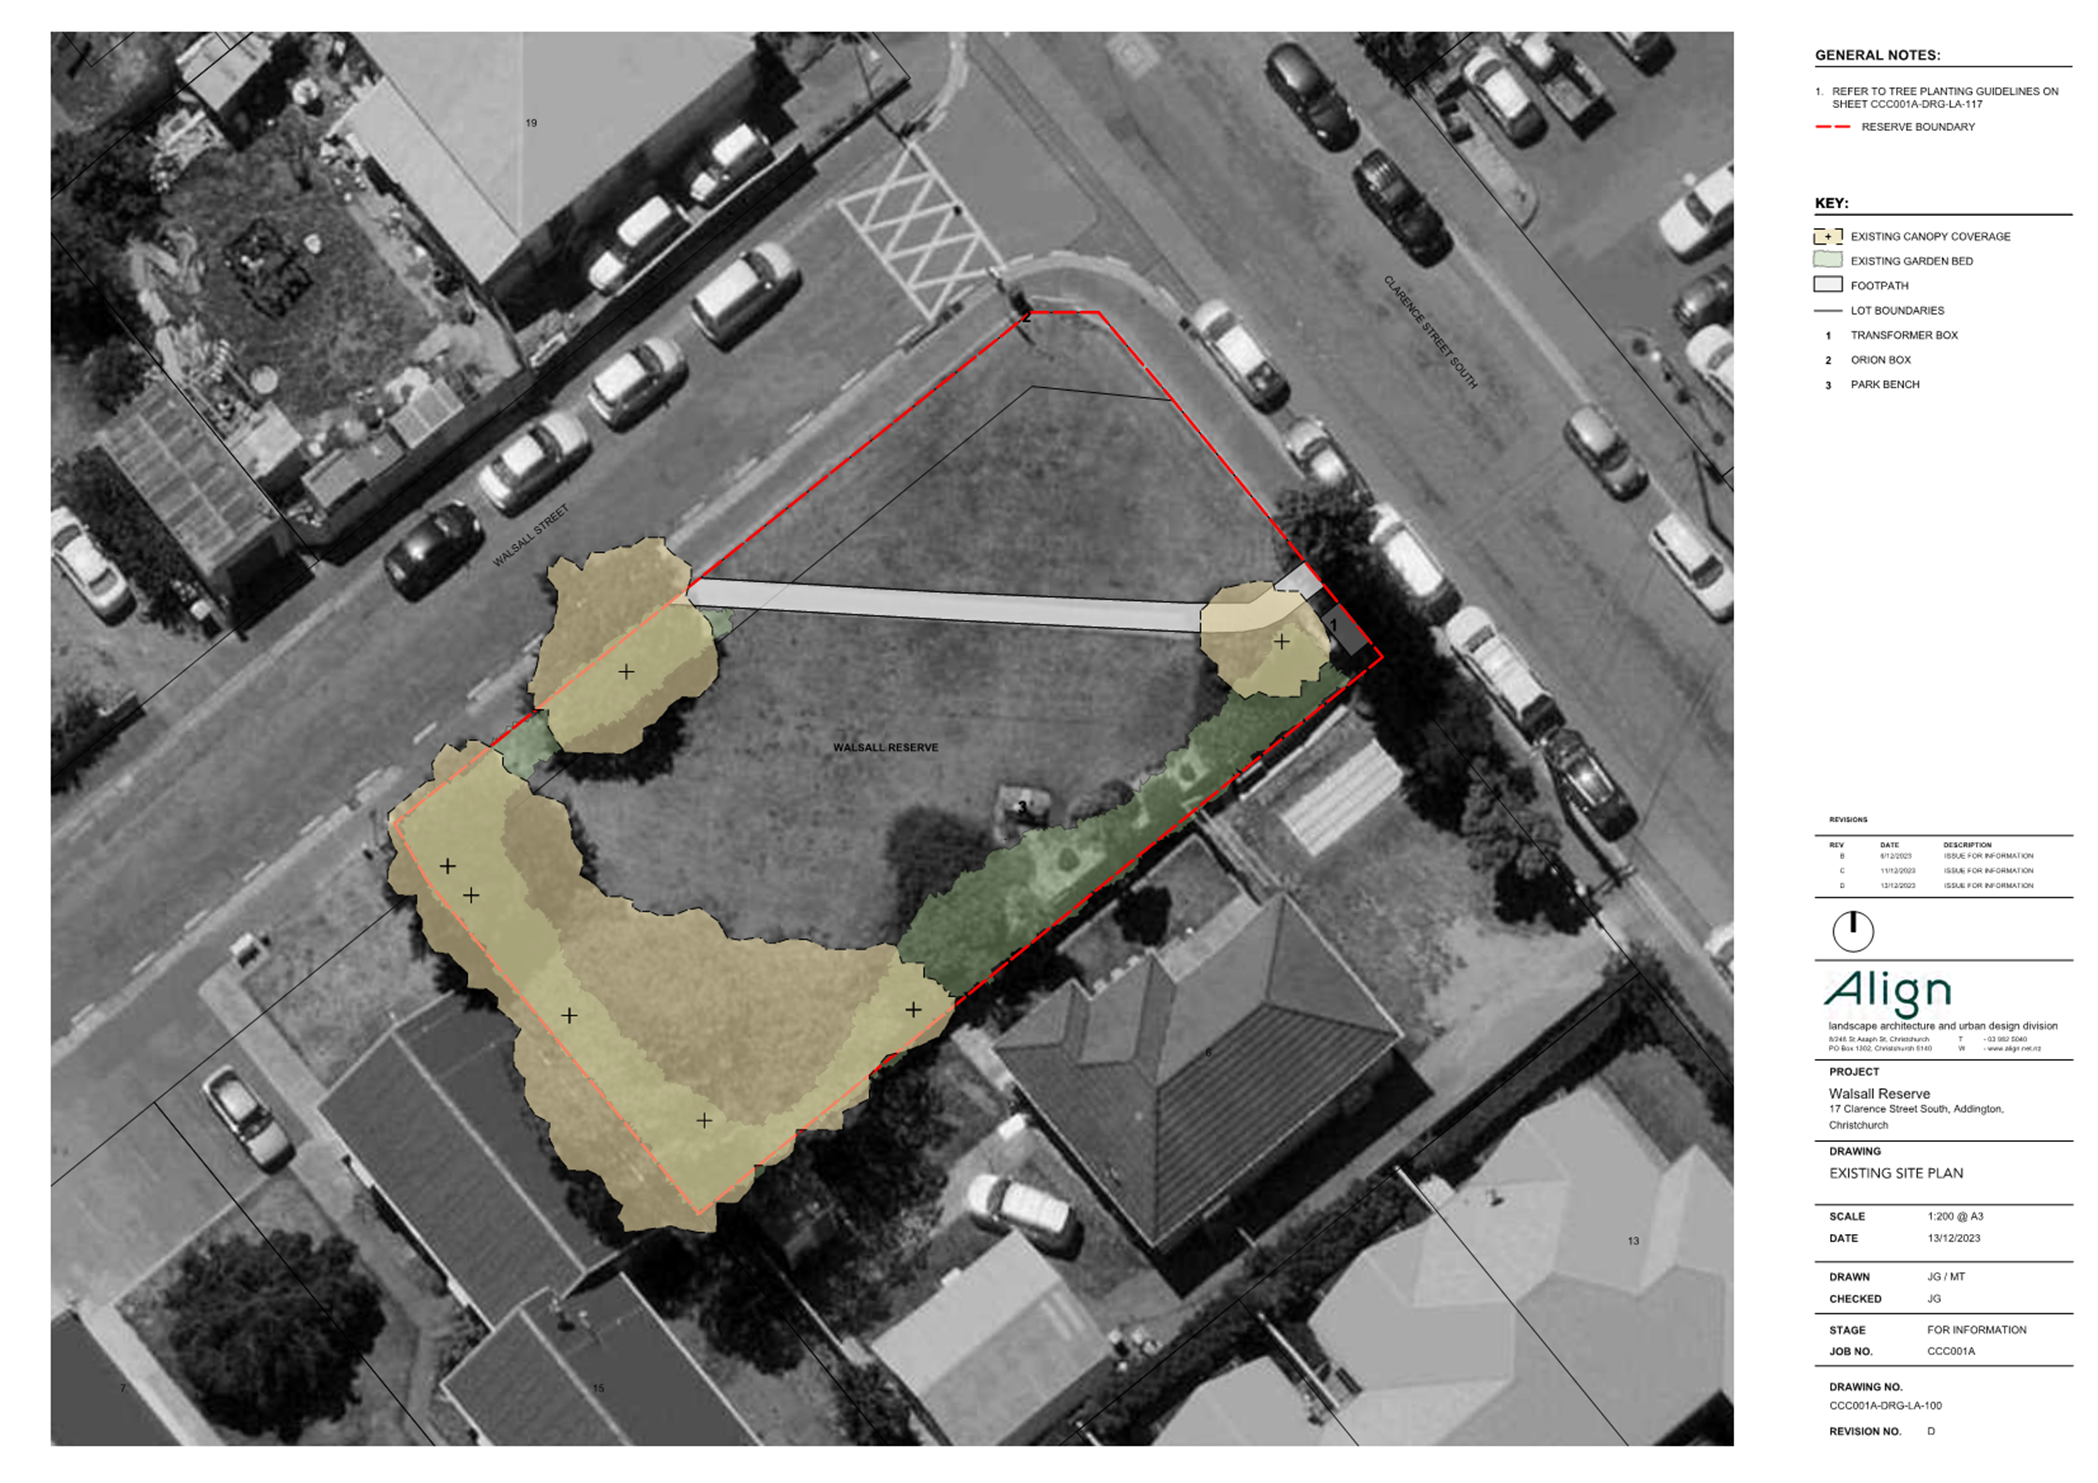 A aerial view of a neighborhood

Description automatically generated